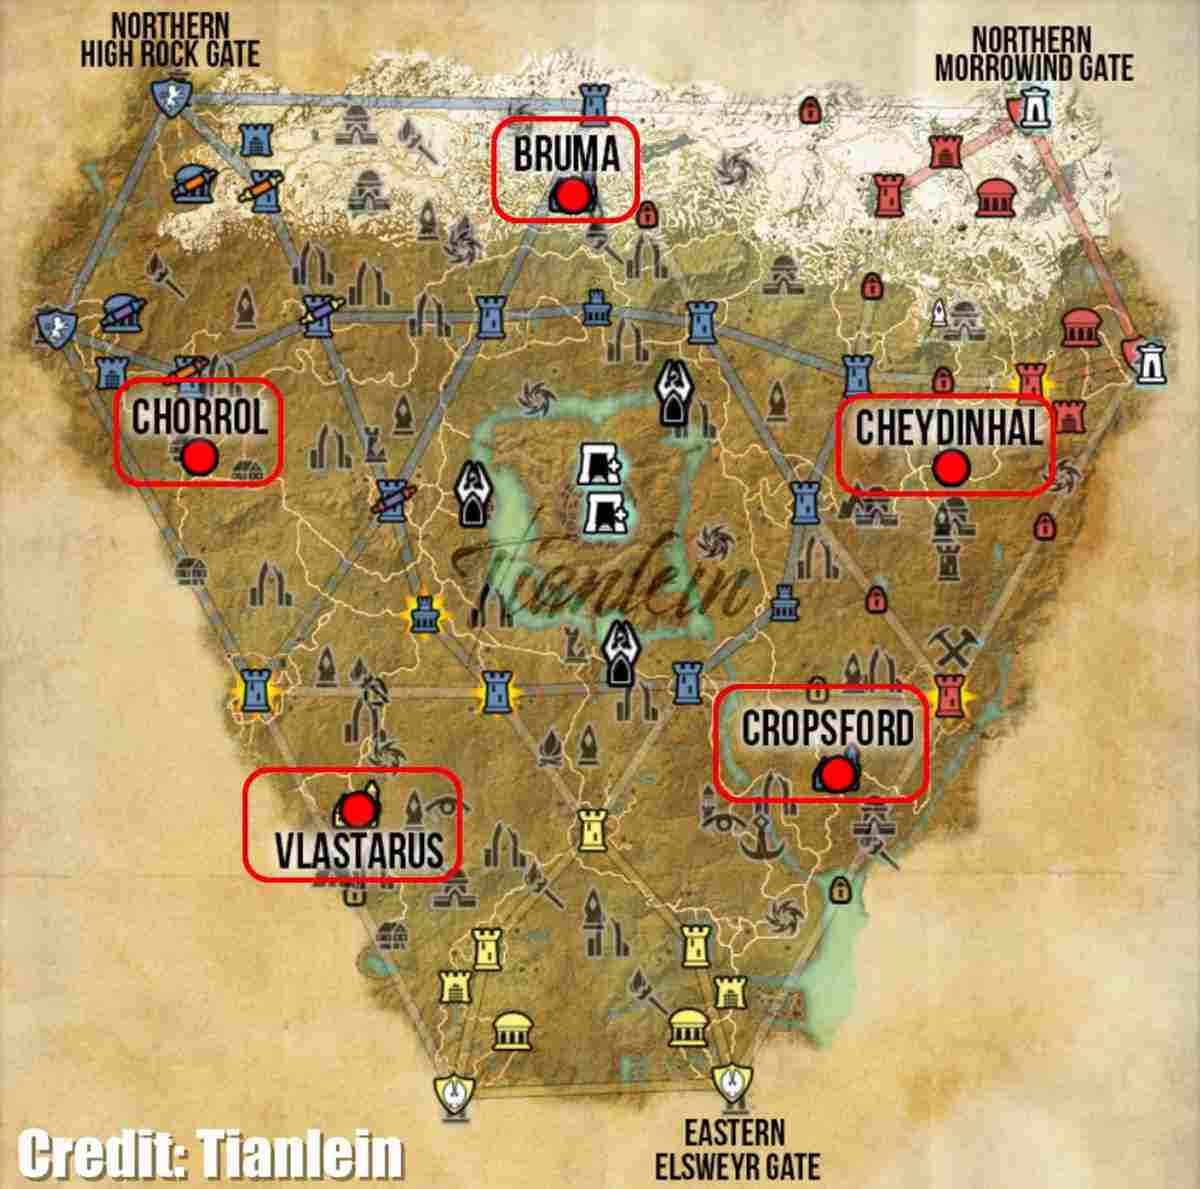 ESO Events 2022 Whitestrake's Mayhem Event Guide - Where to Do the Cyrodiil Daily Repeatable PvE Quests